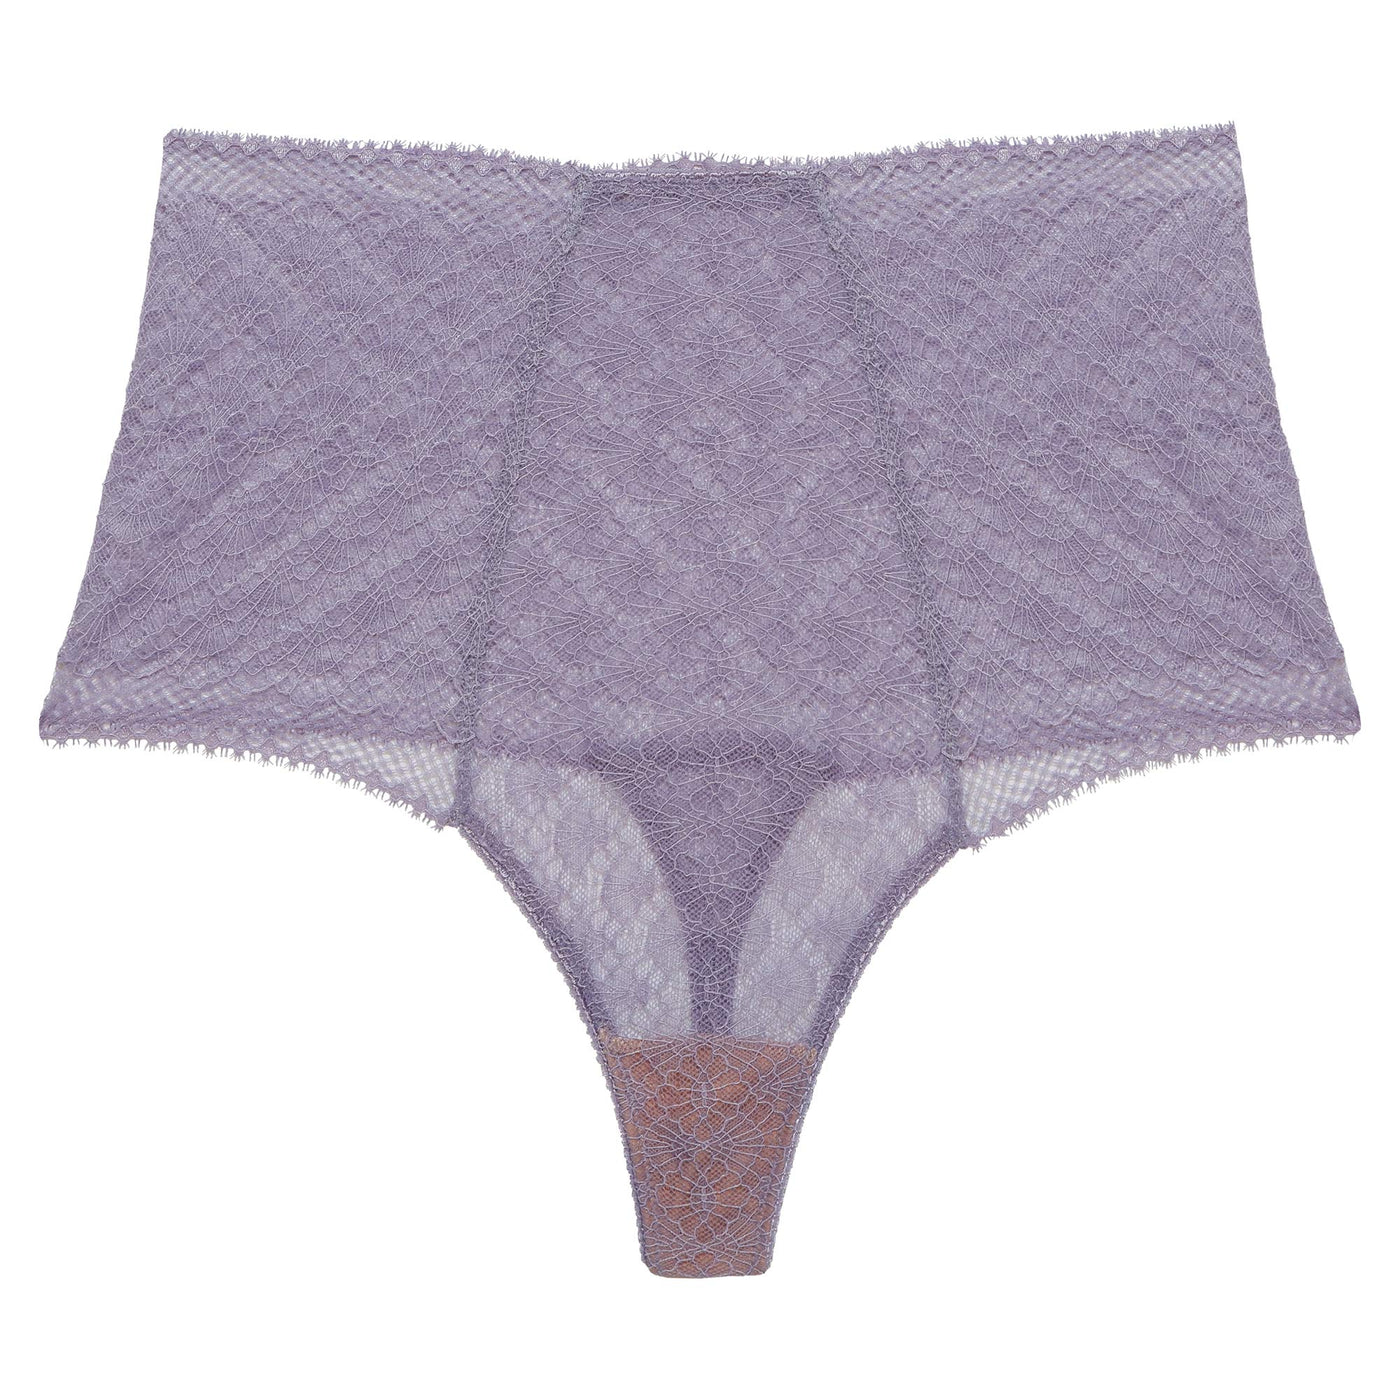 Underprotection Christy High String Purple. 